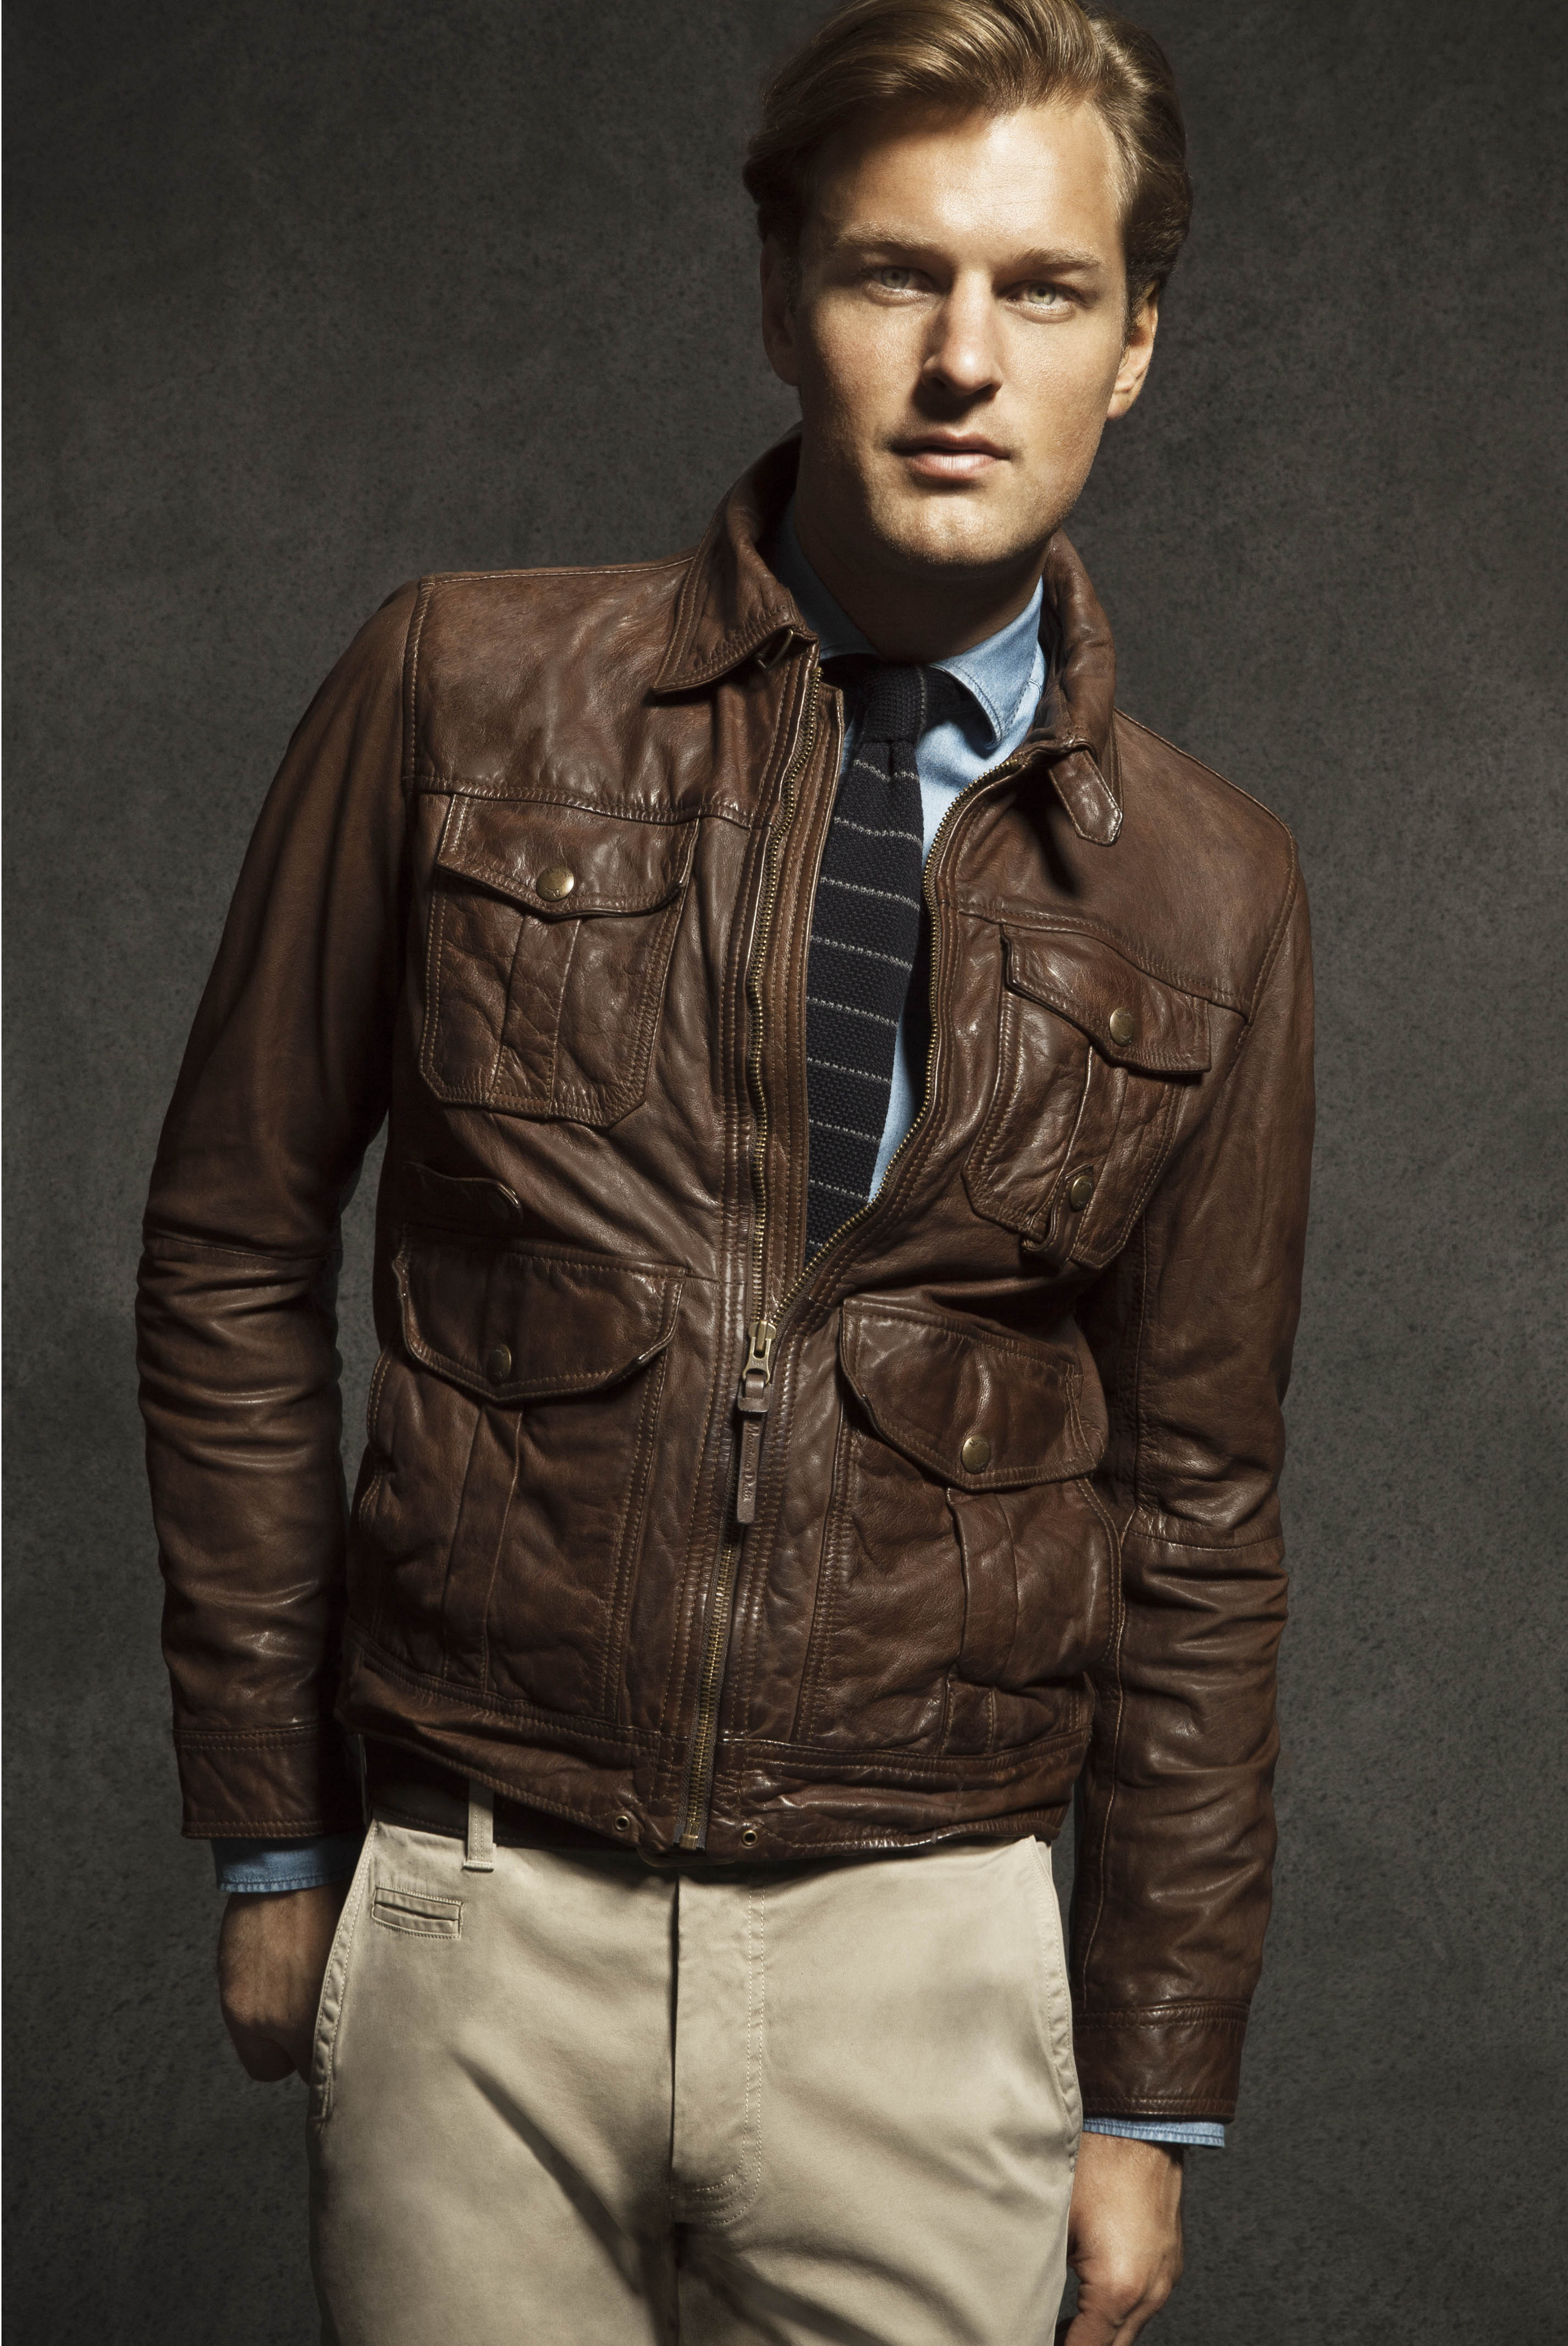 Doug Pickett is a Polished Gentleman for the Massimo Dutti August 2012 ...